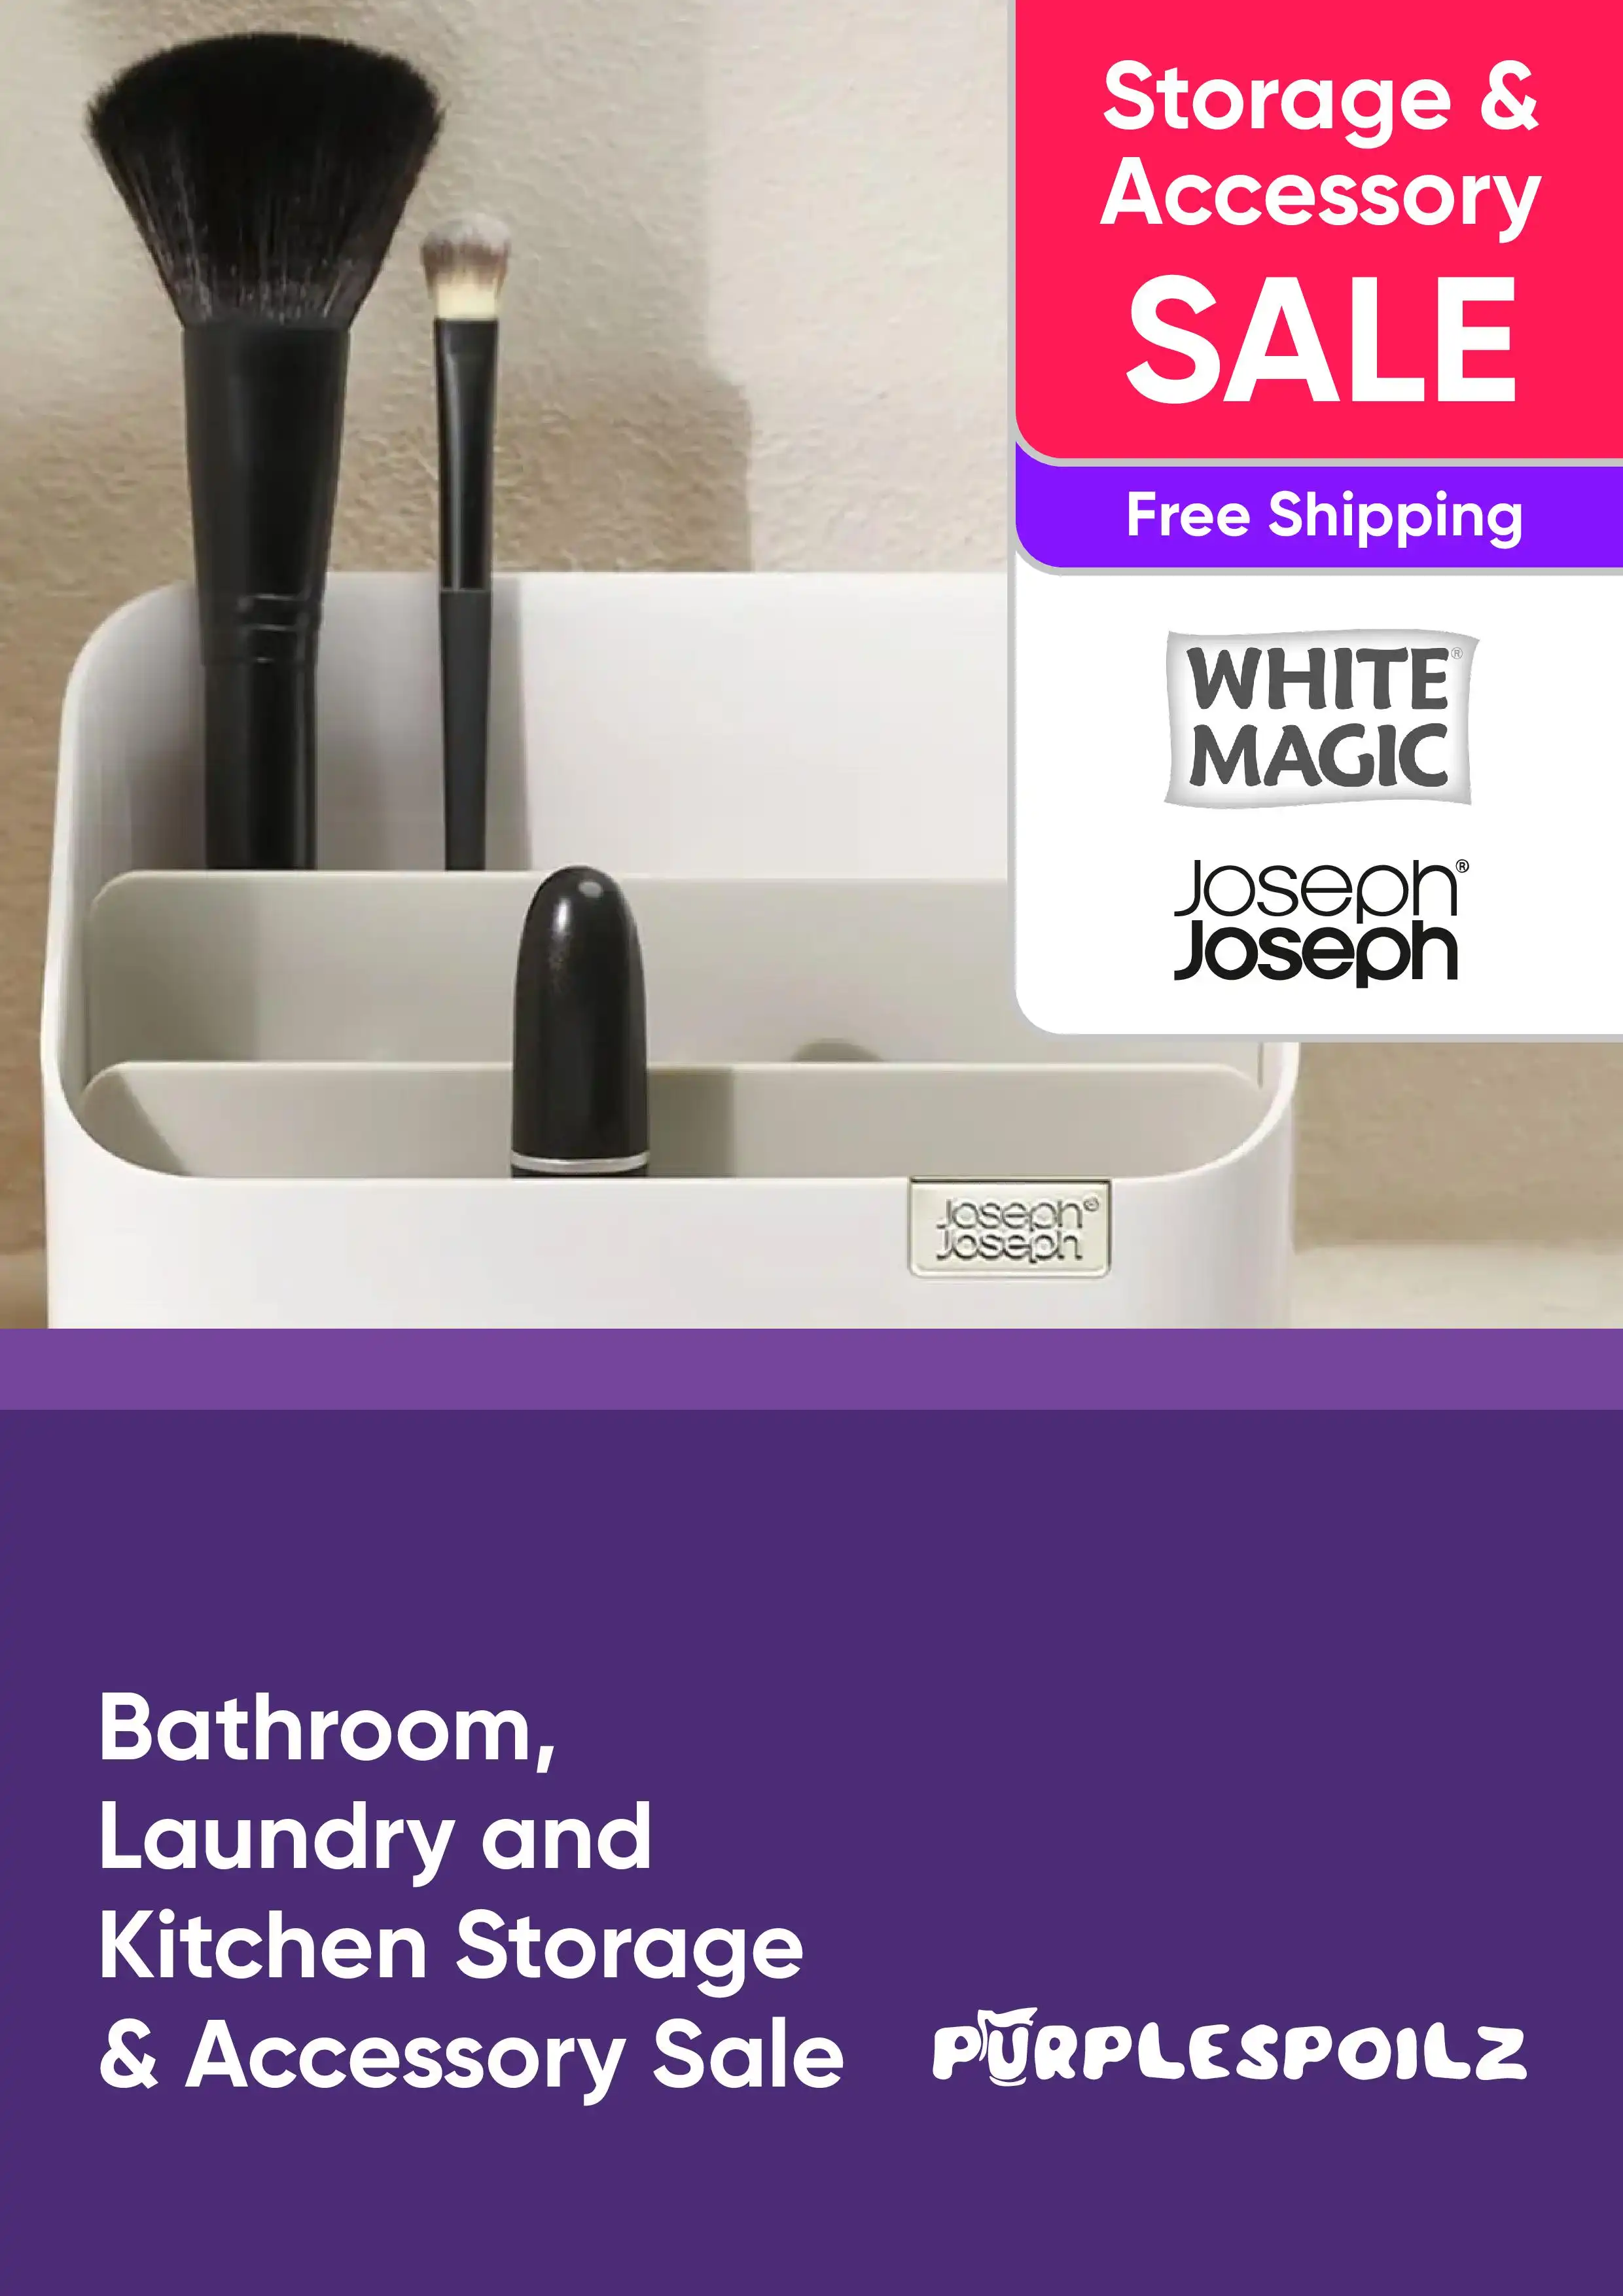 Bathroom, Cleaning and Laundry Accessories Specials - Storage, Shower Caddies, Bins and More - Free Shipping